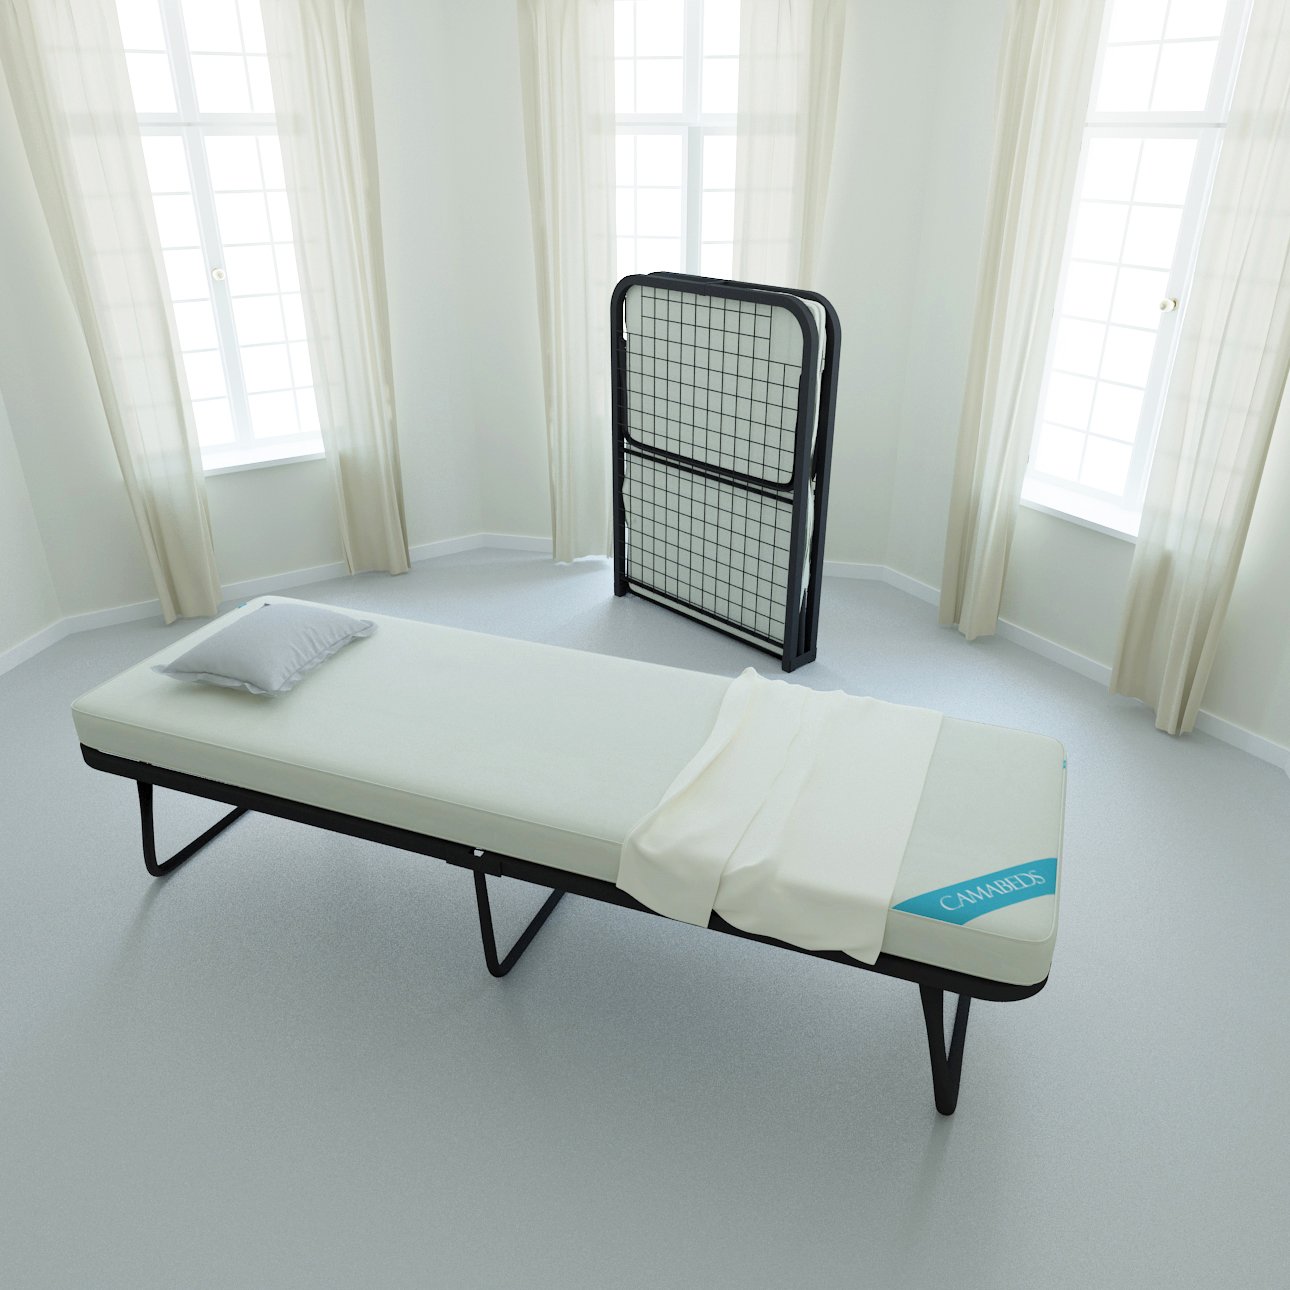 Top 10 best Folding Beds of 2020 - Reviews